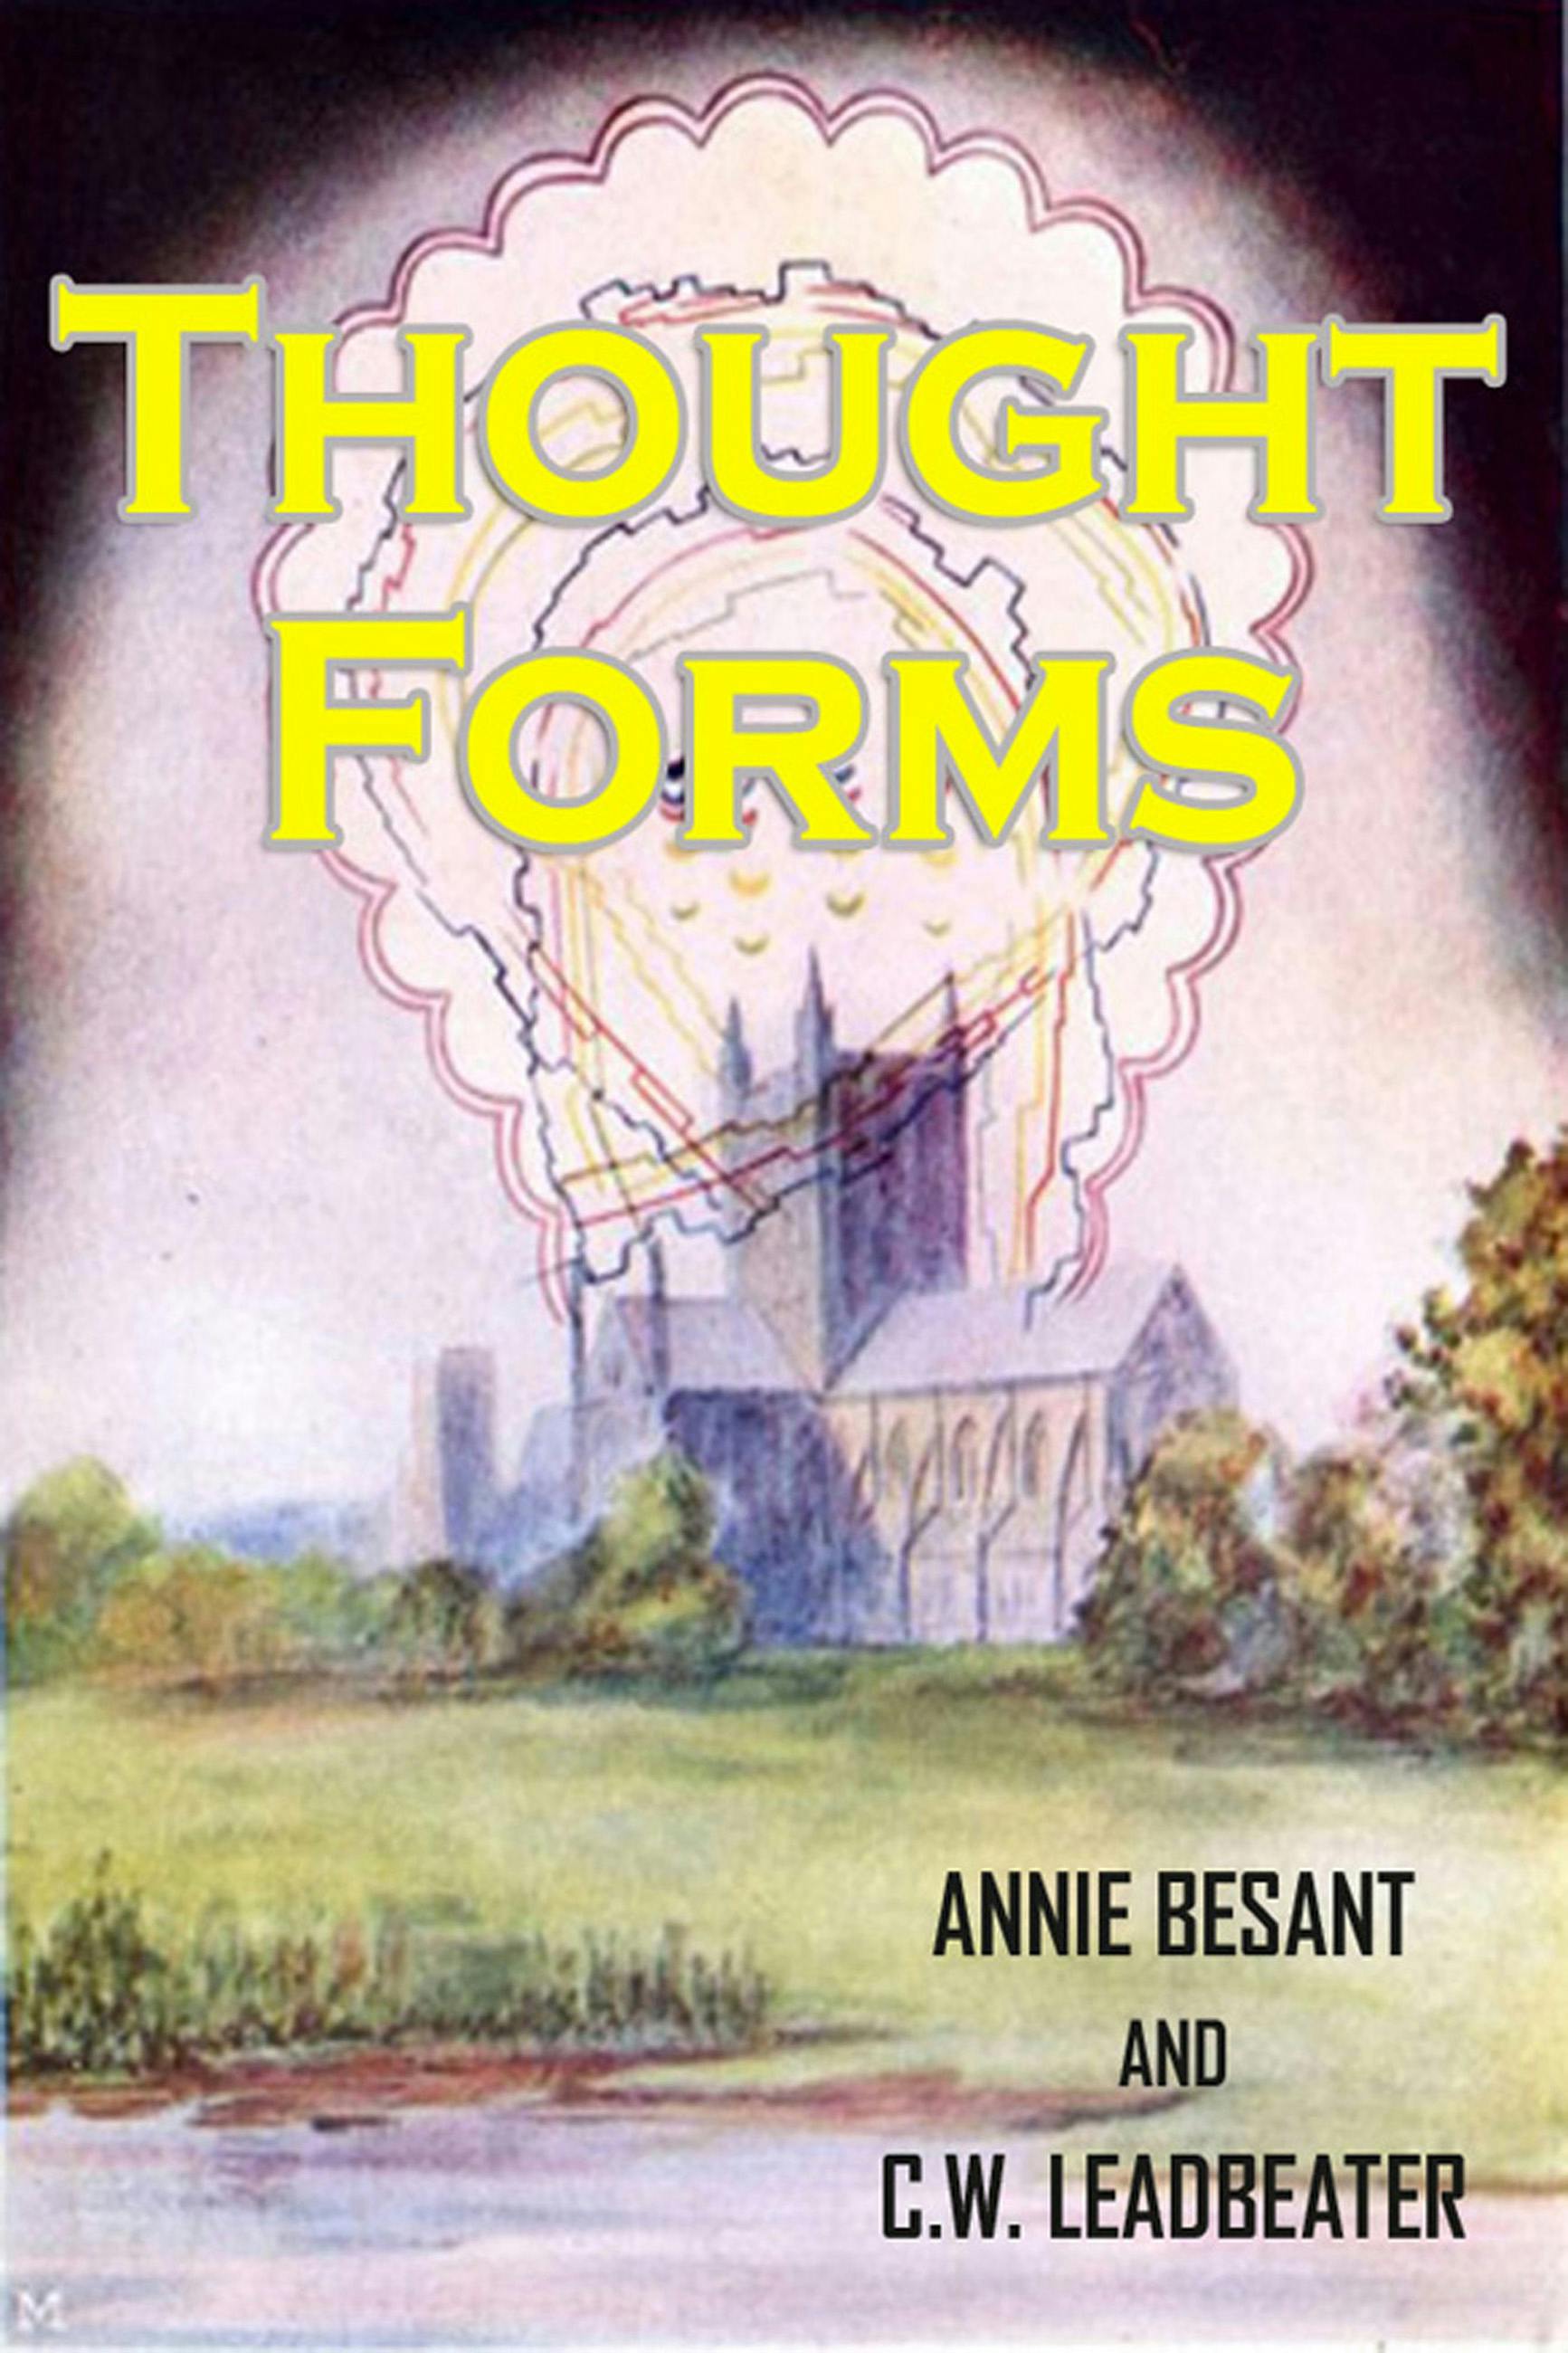 Thought-Forms - Annie Besant, C. W. LEADBEATER